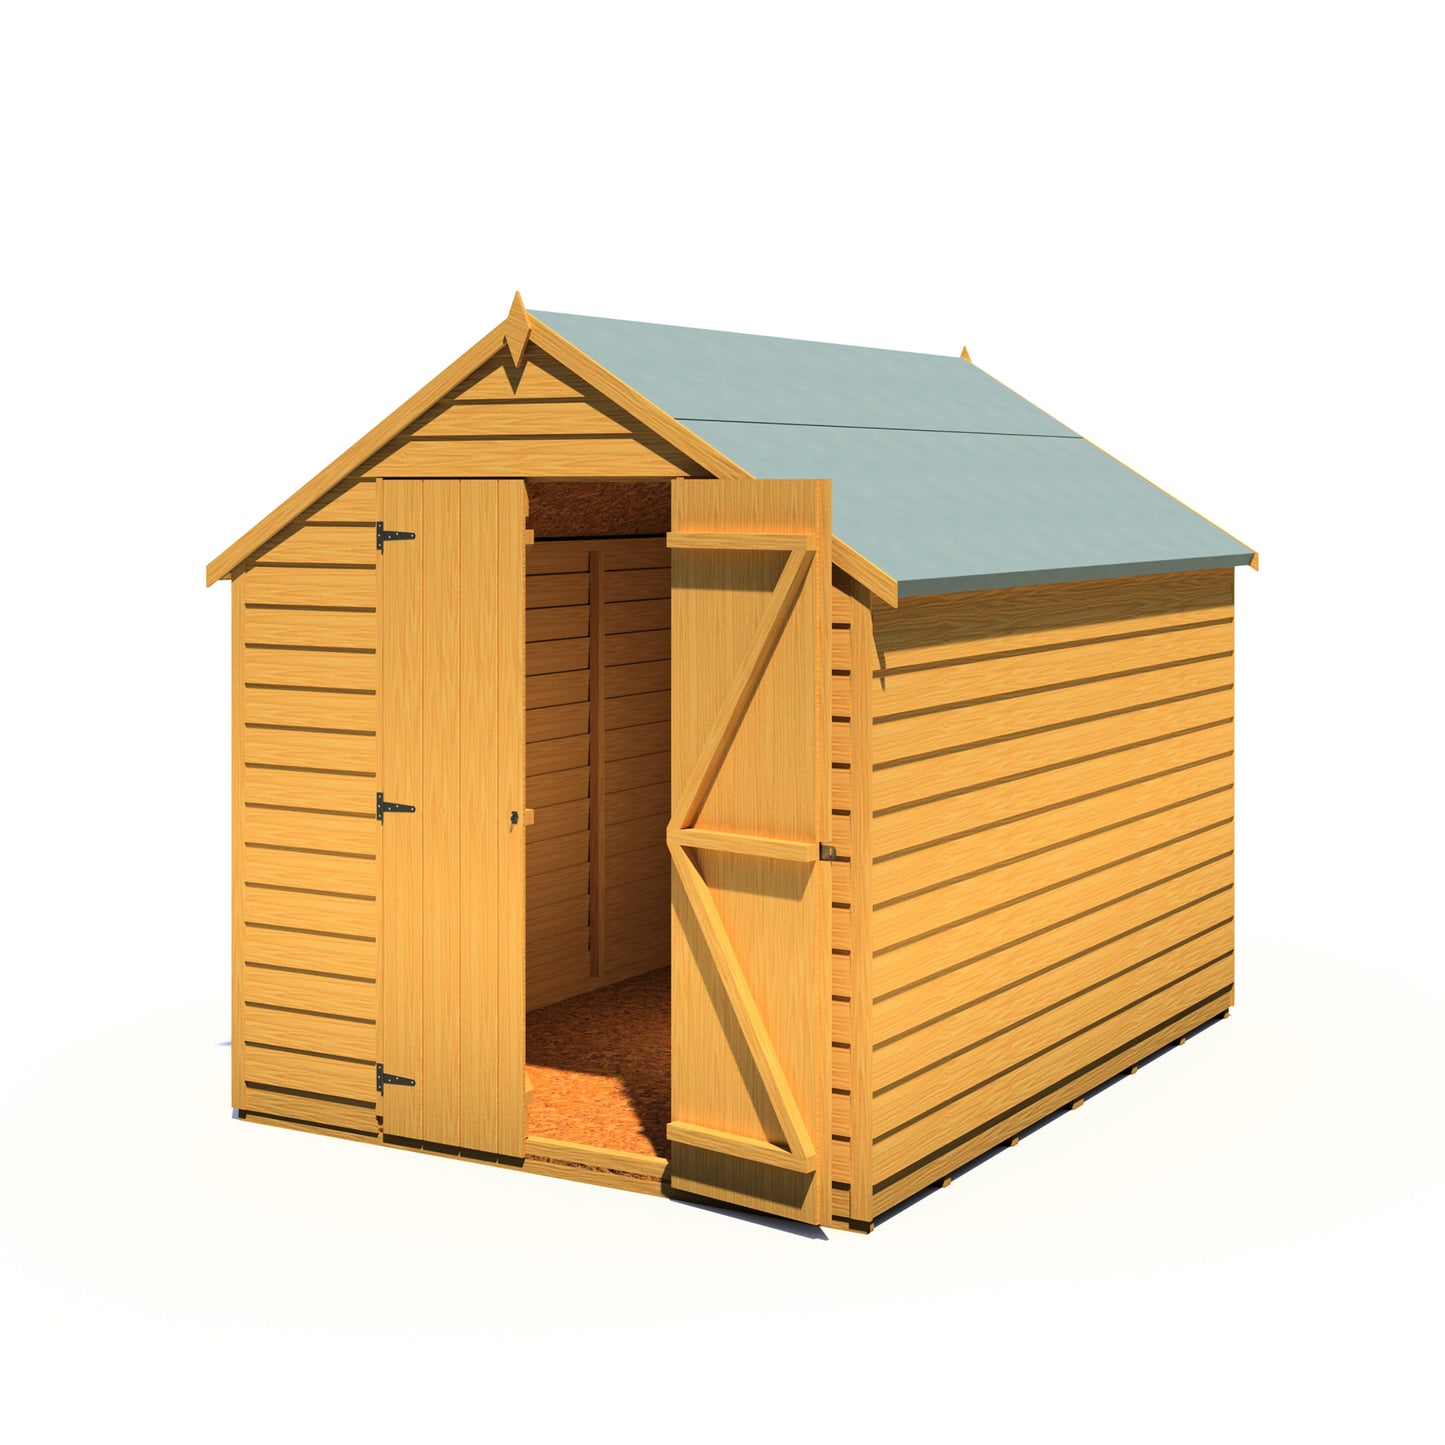 Shire 8 x 6 Overlap Value Dip Treated Garden Shed Shed - Premium Garden